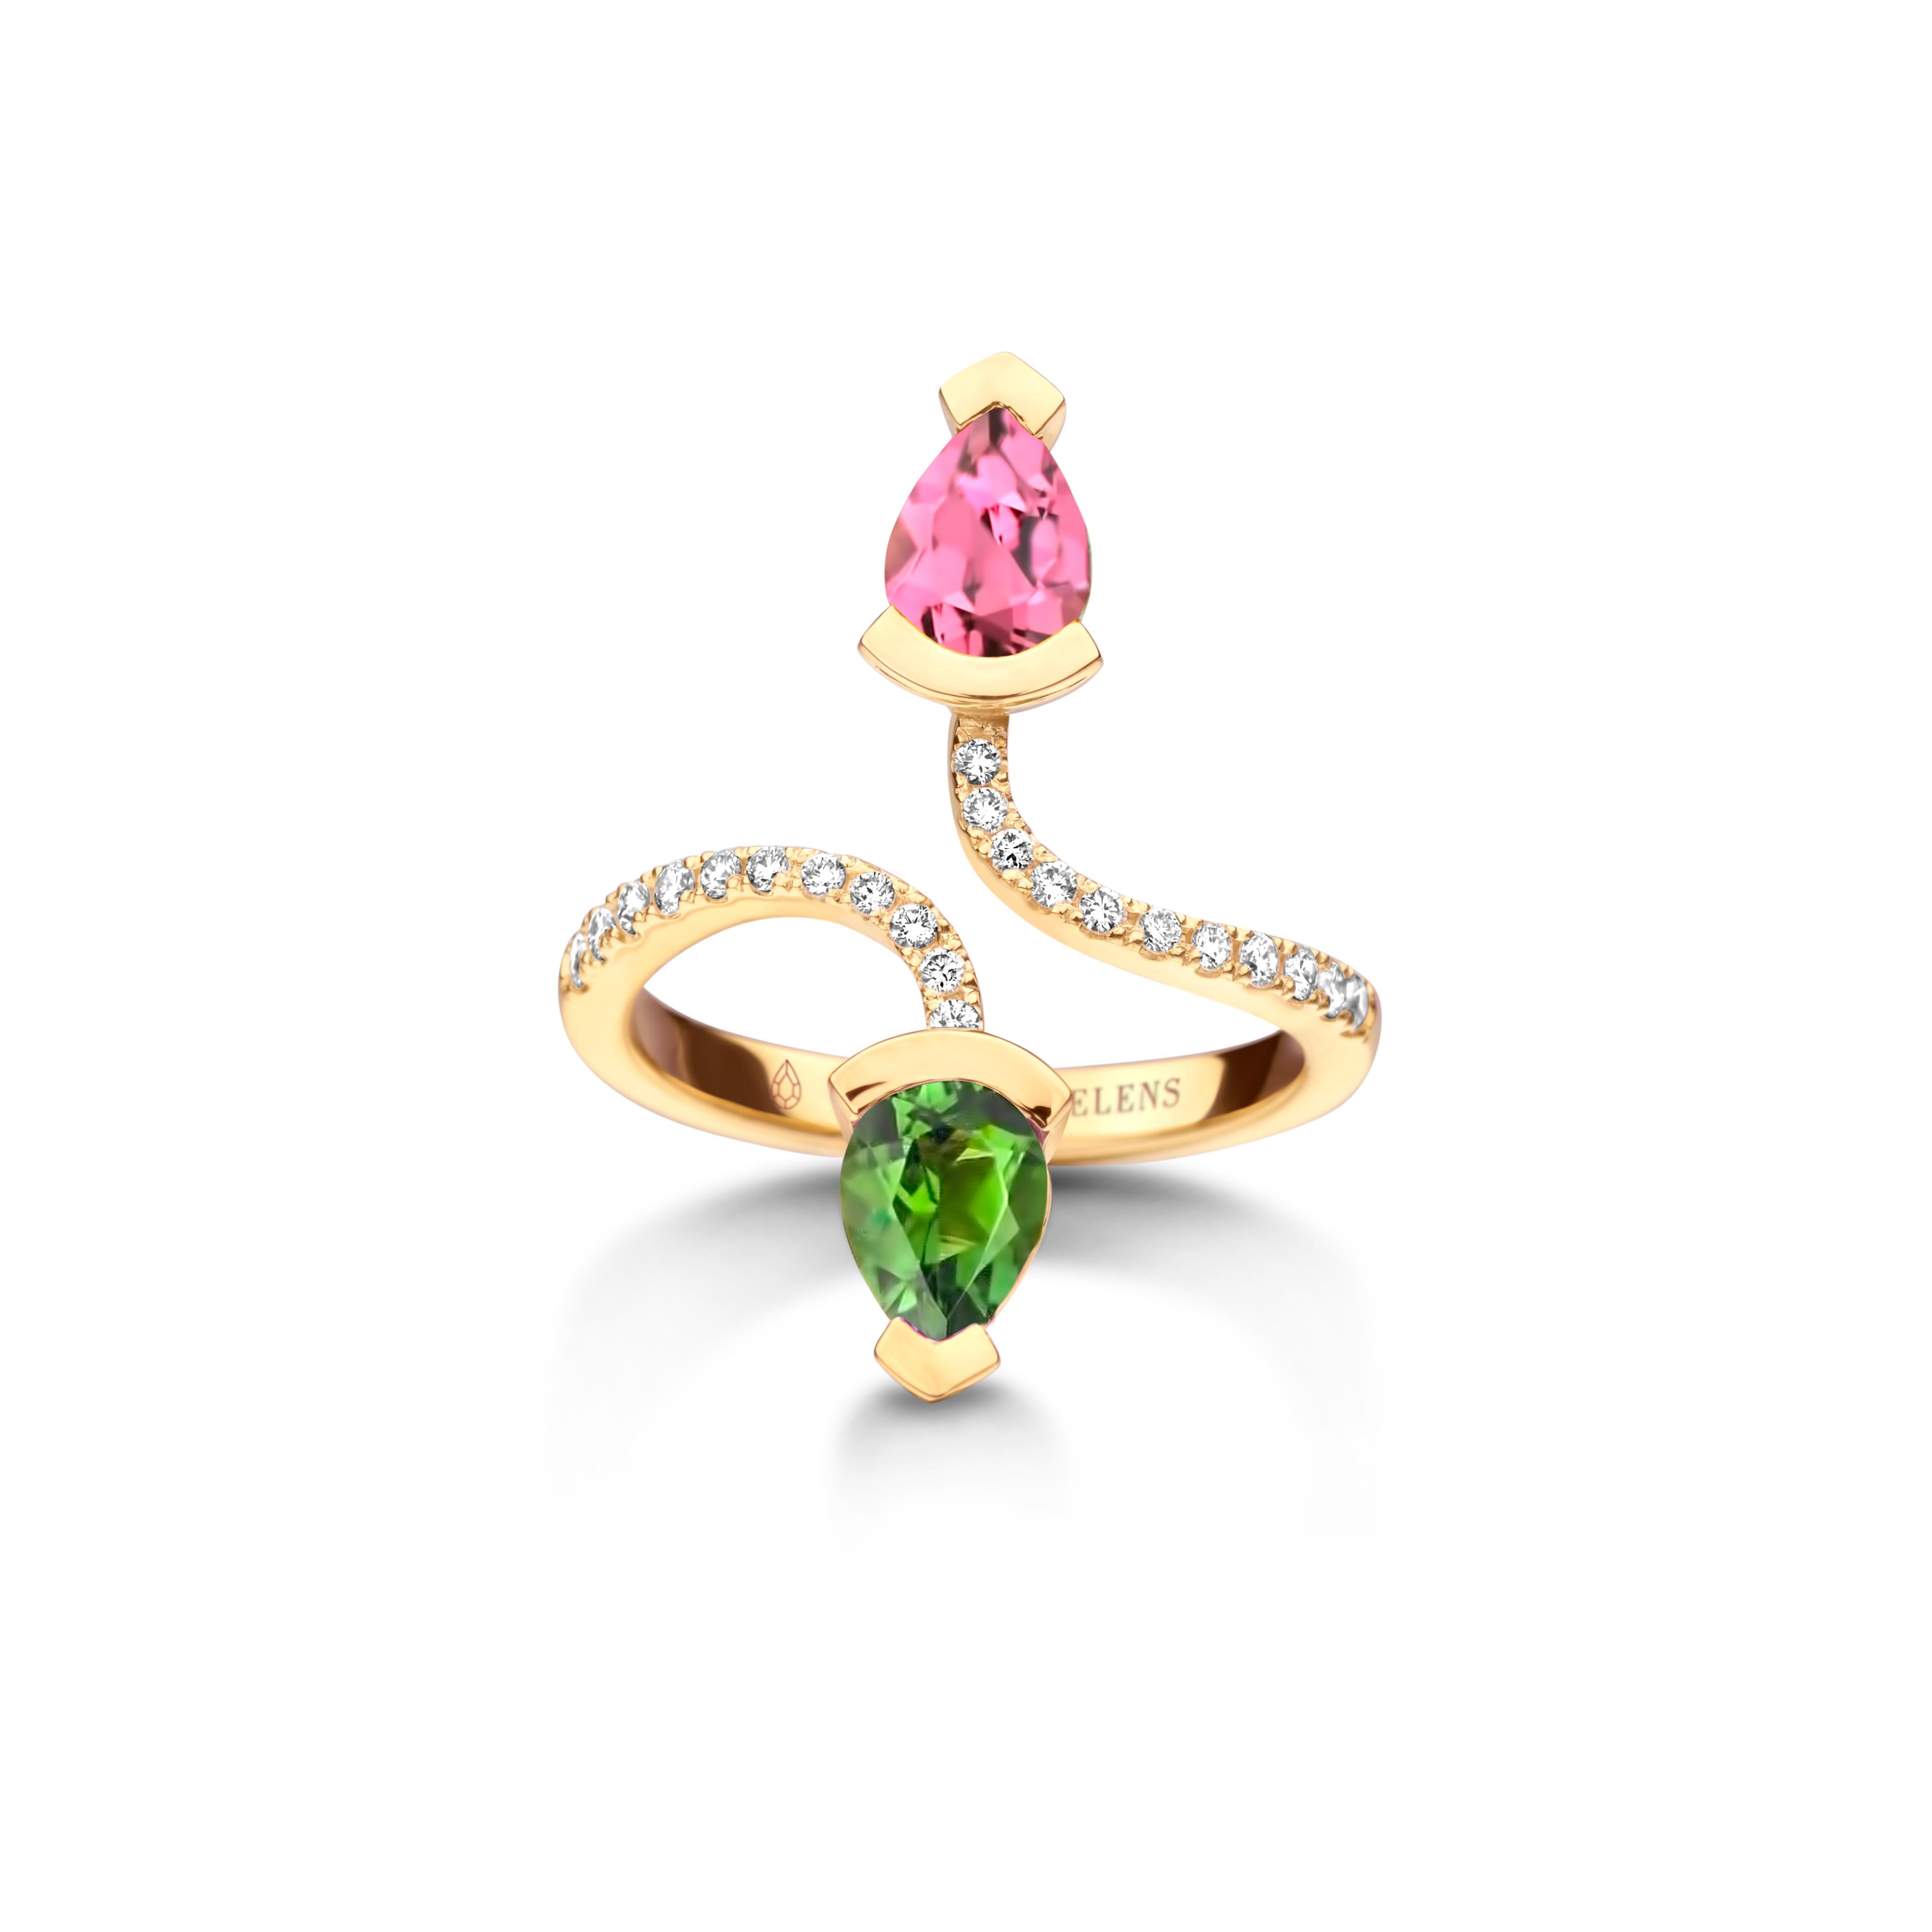 Adeline Duo ring in 18Kt white gold 5g set with a pear-shaped pink tourmaline 0,70 Ct, a pear-shaped green tourmaline 0,70 Ct and 0,19 Ct of white brilliant cut diamonds - VS F quality. Celine Roelens, a goldsmith and gemologist, is specialized in